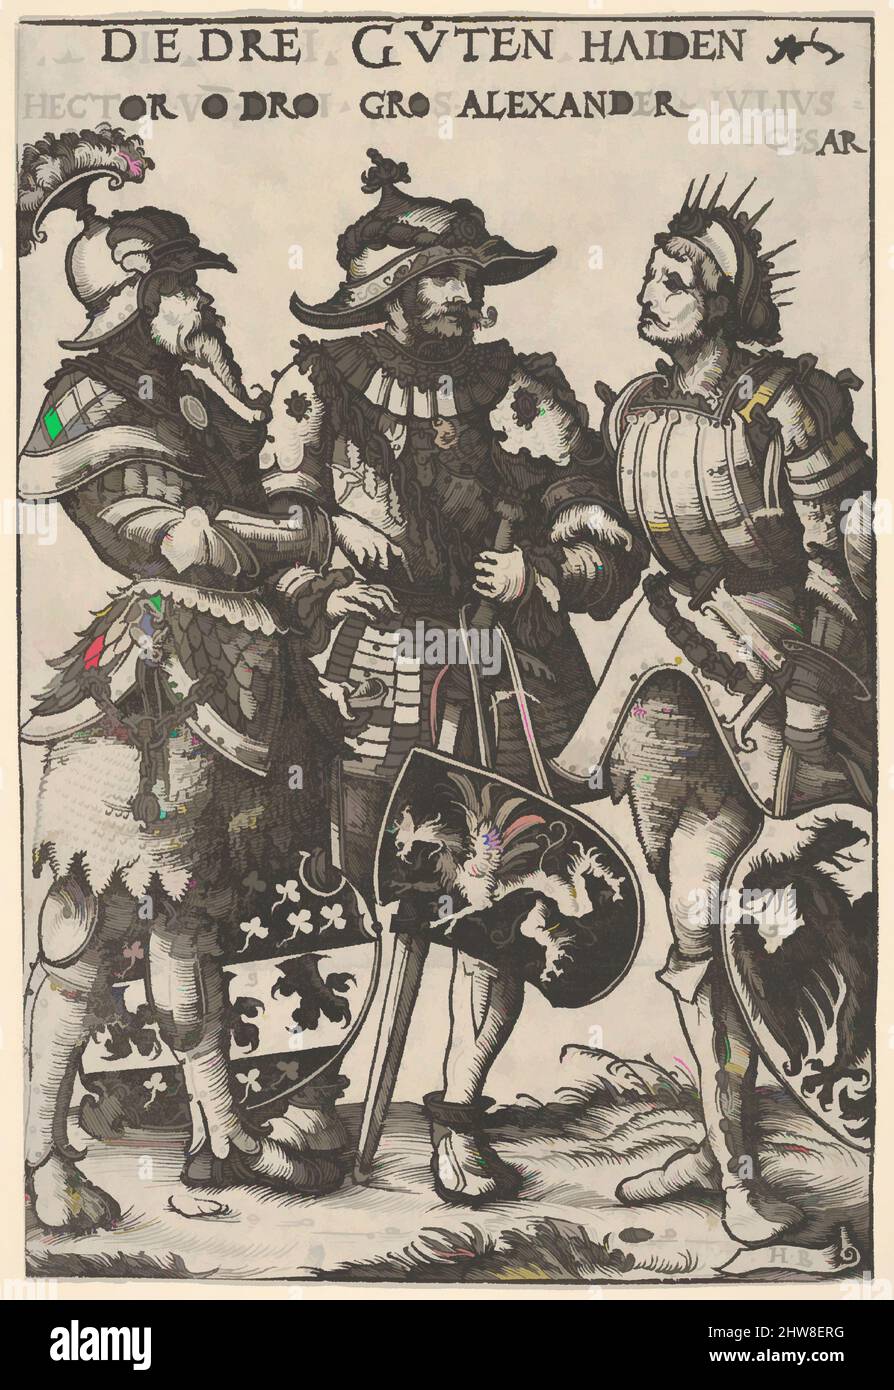 Art inspired by The Three Heathen Heroes (Die Drei Guten Haiden), from Heroes and Heroines, 1516, Woodcut; first state of three (Hollstein), Sheet: 7 5/8 × 5 3/16 in. (19.4 × 13.1 cm), Prints, Hans Burgkmair (German, Augsburg 1473–1531 Augsburg), Block cut by Jost de Negker (1480–1546, Classic works modernized by Artotop with a splash of modernity. Shapes, color and value, eye-catching visual impact on art. Emotions through freedom of artworks in a contemporary way. A timeless message pursuing a wildly creative new direction. Artists turning to the digital medium and creating the Artotop NFT Stock Photo